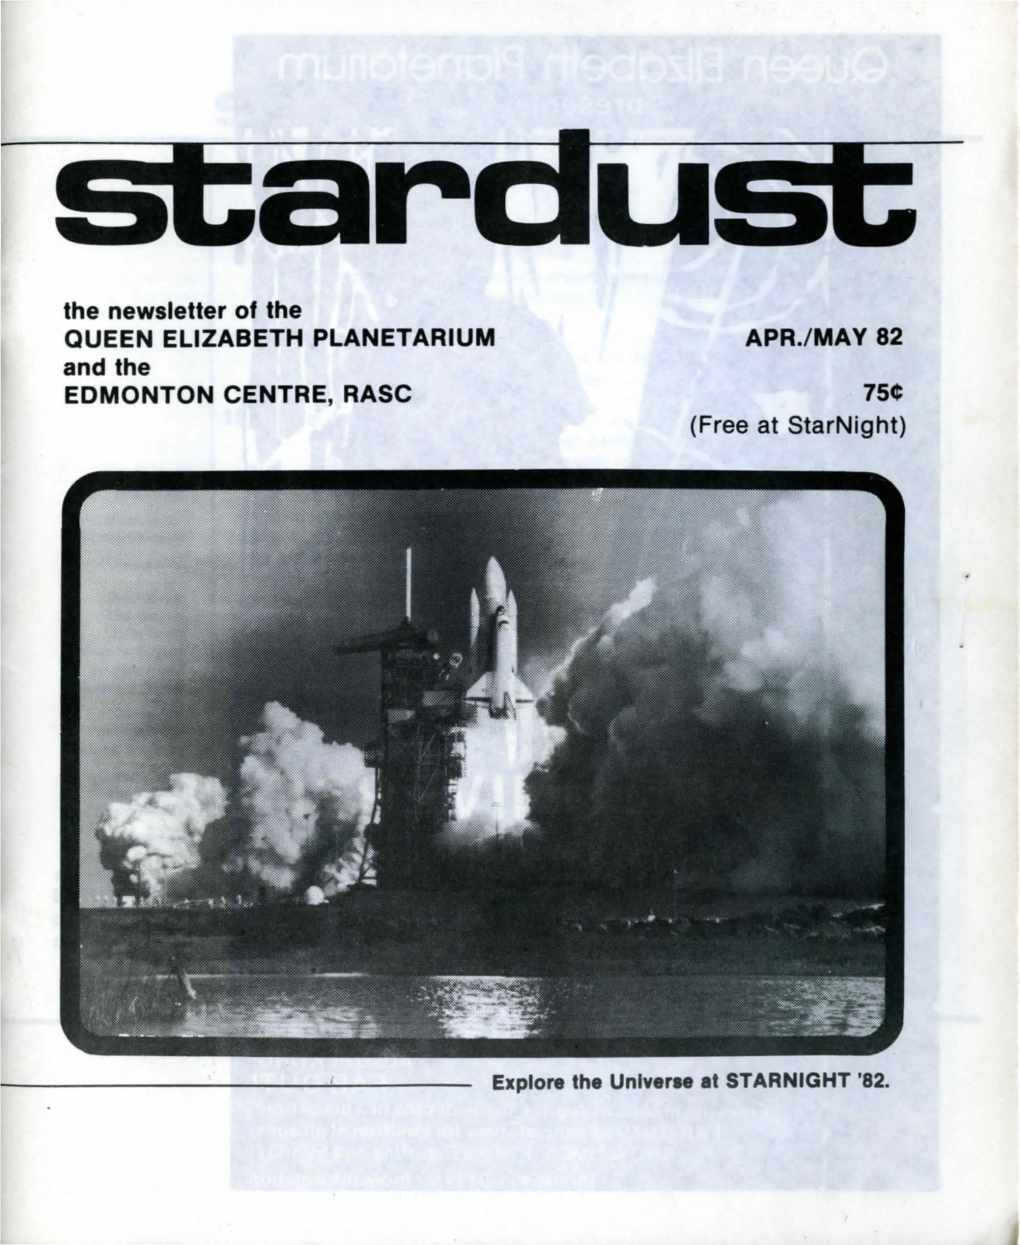 The Newsletter of the QUEEN ELIZABETH PLANETARIUM and the EDMONTON CENTRE, RASC APR.Lmay 82 (Free at Starnight)